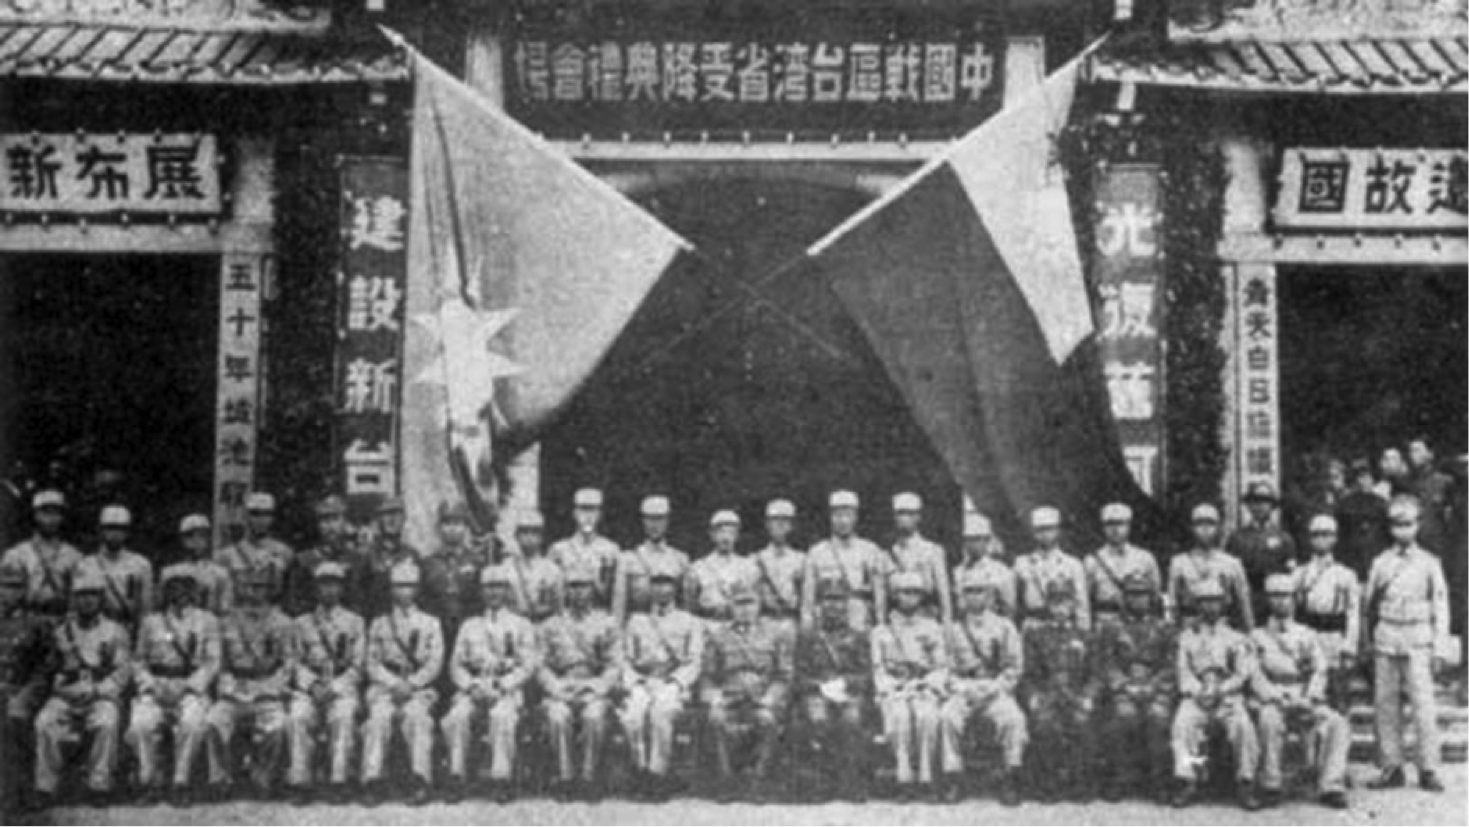 The officers of the new Taiwan Garrison pose for a photograph on the island's Retrocession Day, Oct. 25, 1945. (Wikimedia)